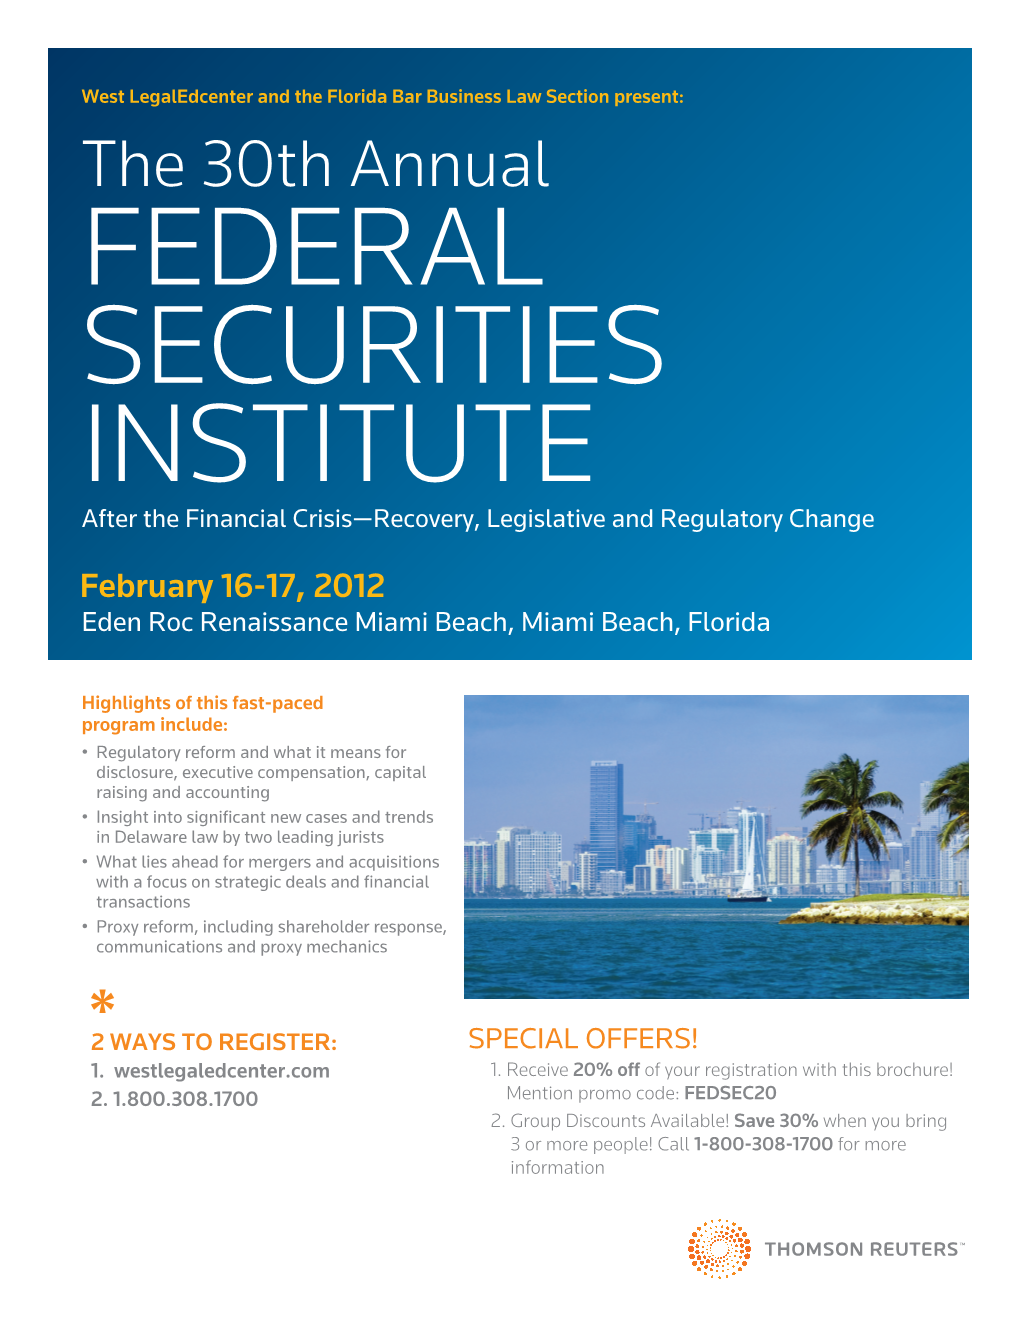 The 30Th Annual FEDERAL SECURITIES INSTITUTE After the Financial Crisis—Recovery, Legislative and Regulatory Change